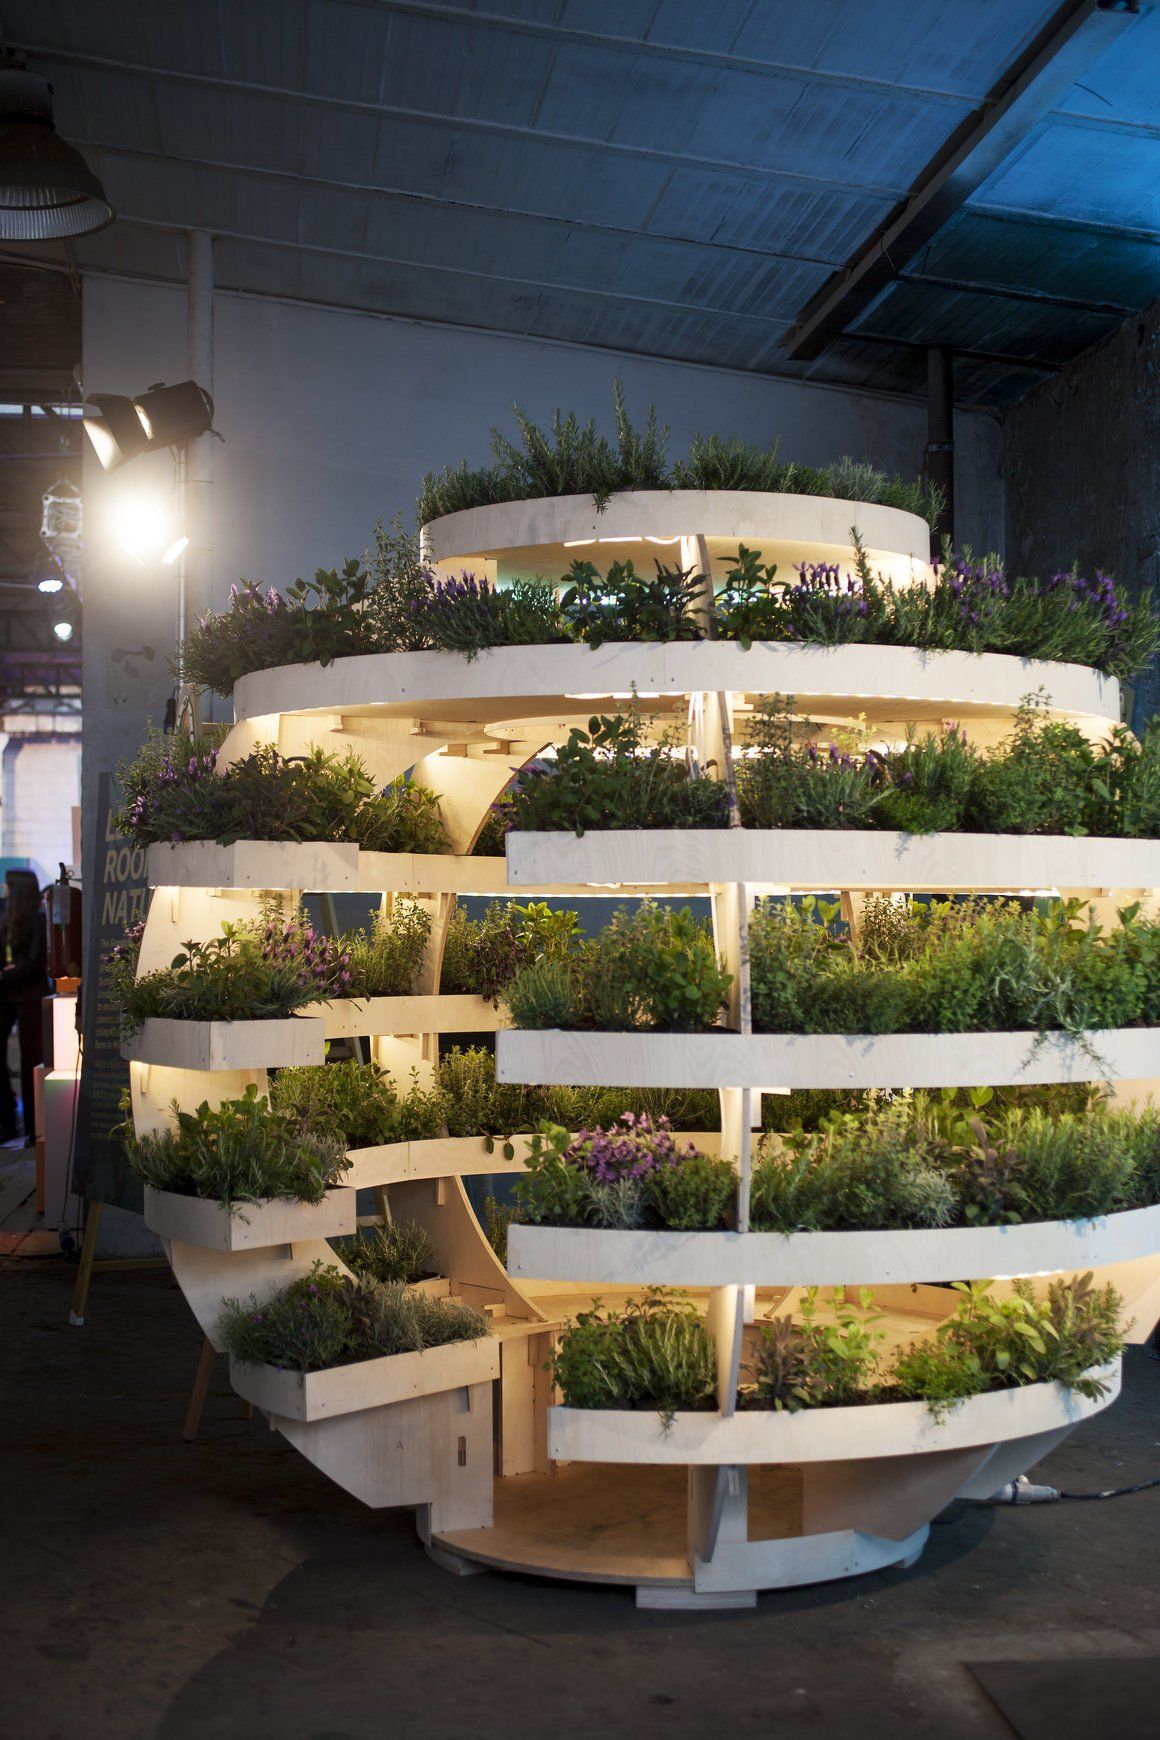 The Growroom is now found around the world offering communities an urban farm.